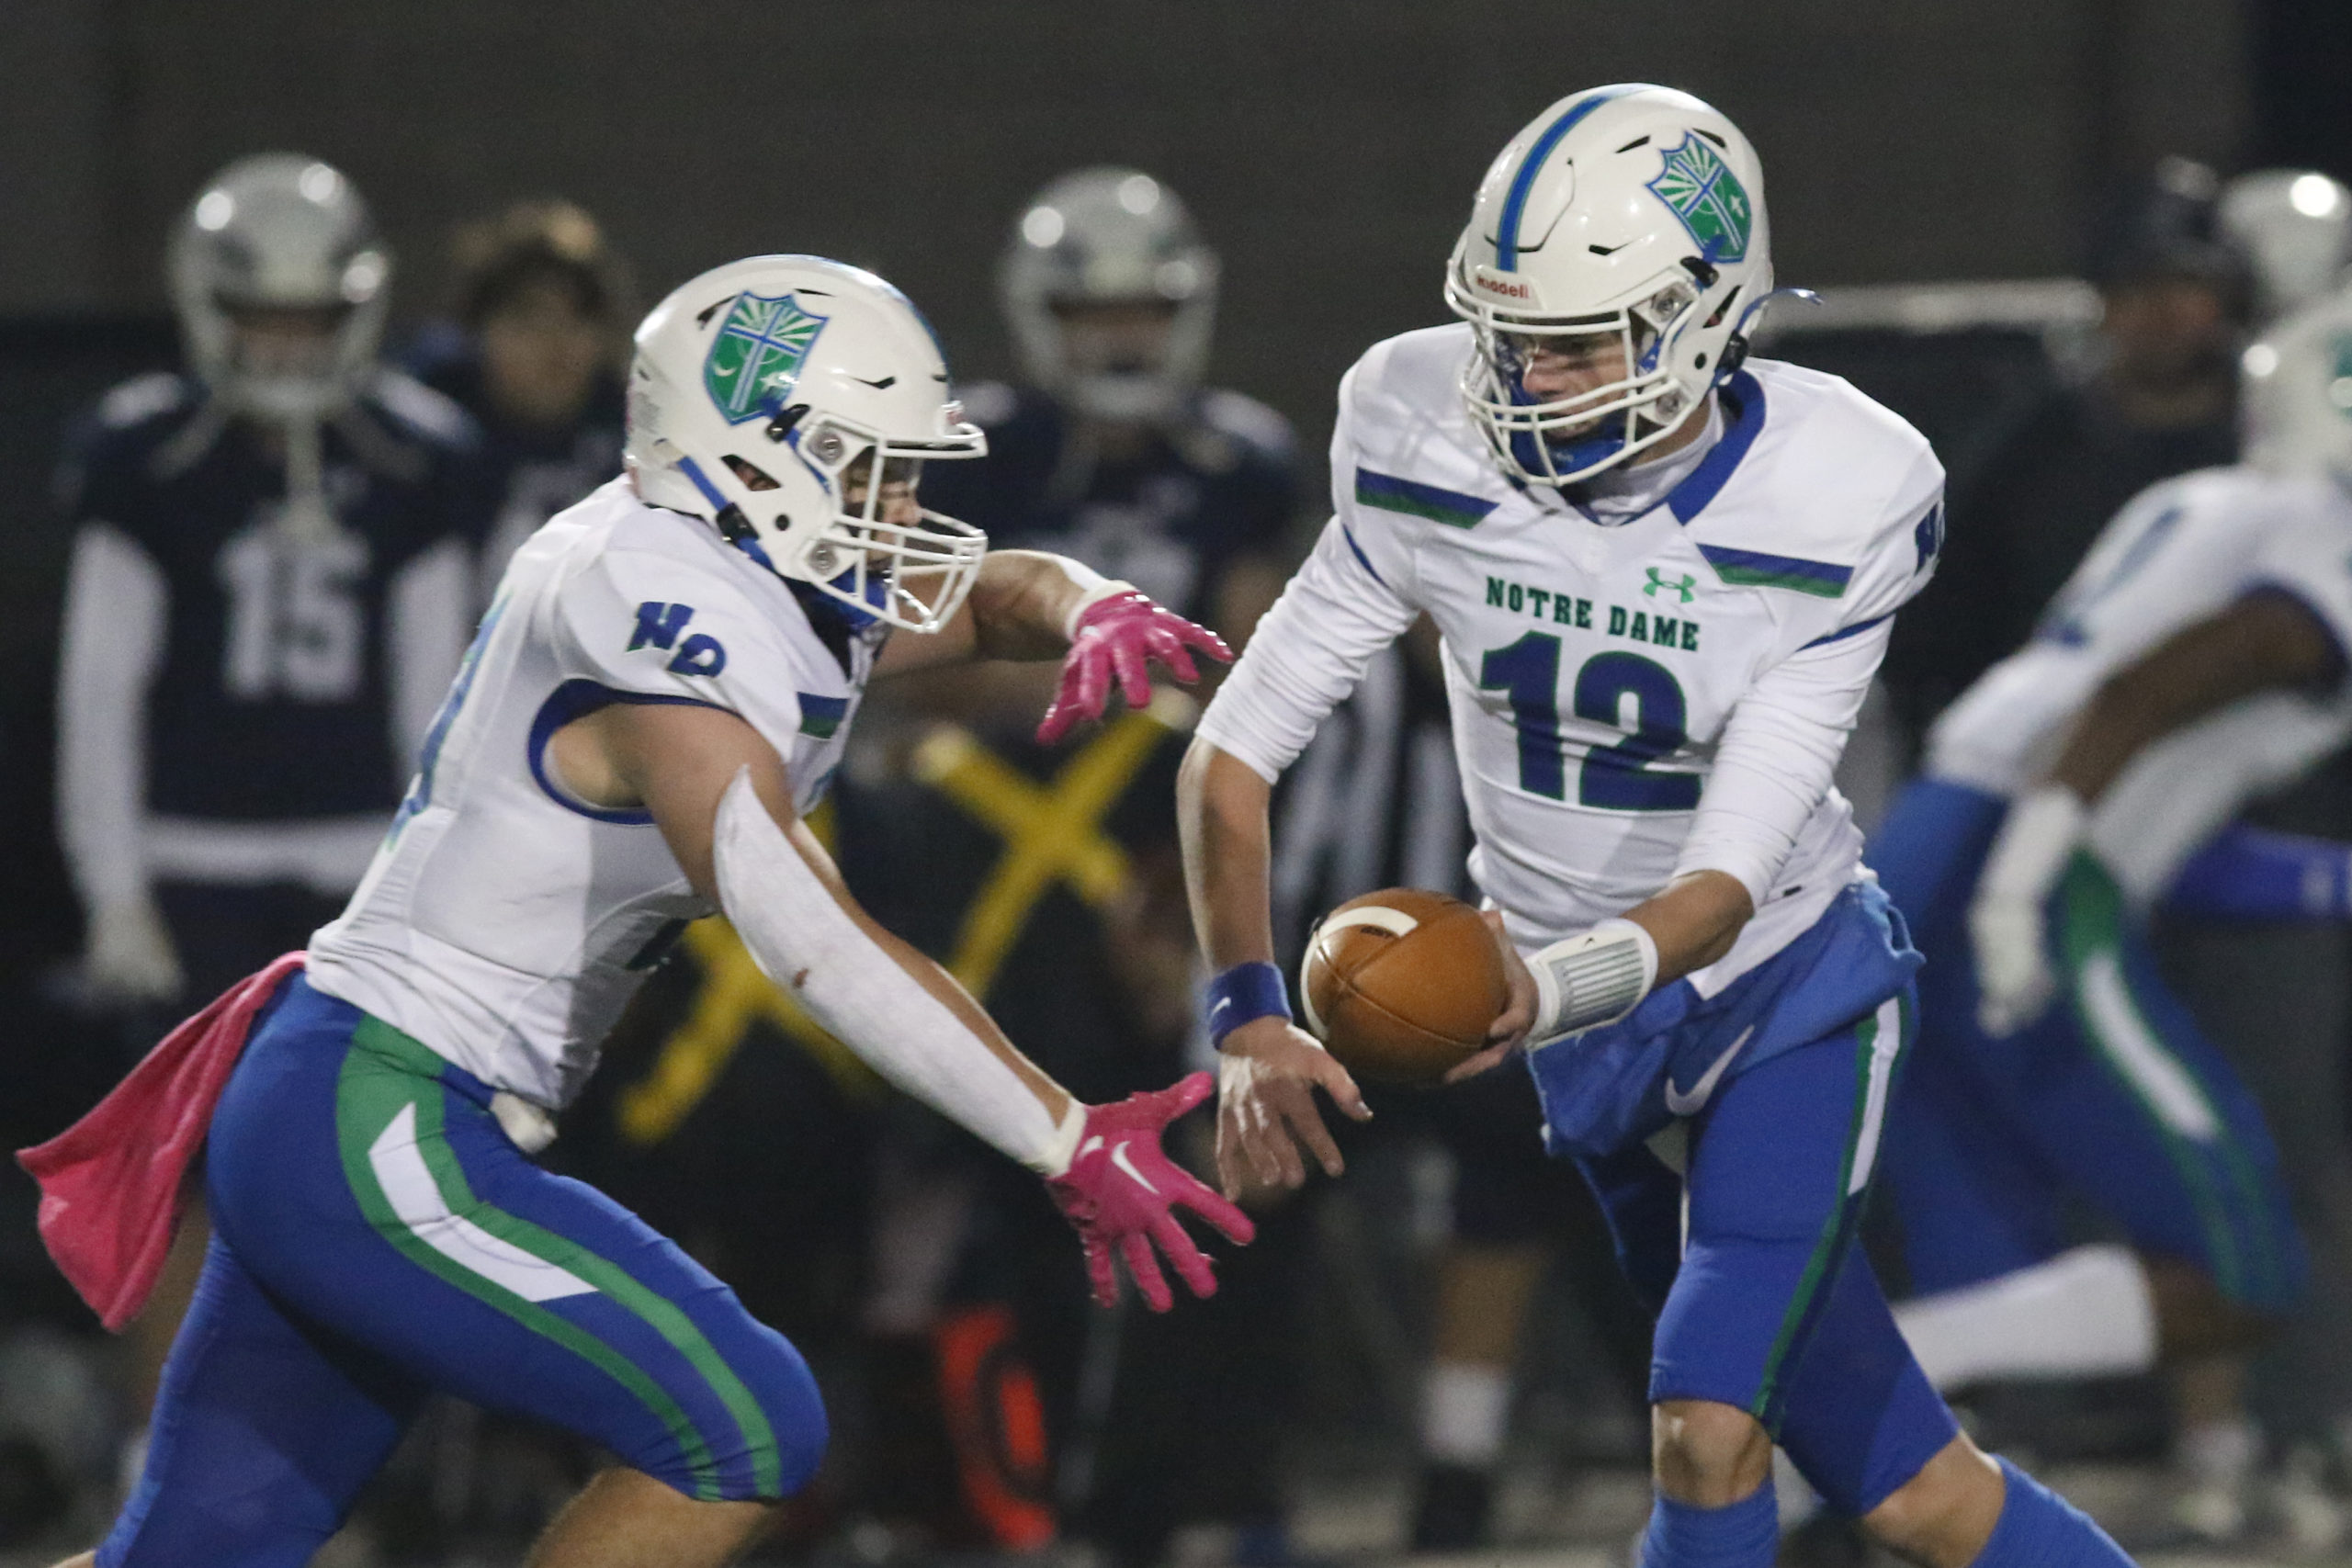 LEVEL 3 PLAYOFFS: Notre Dame falls short on late touchdown